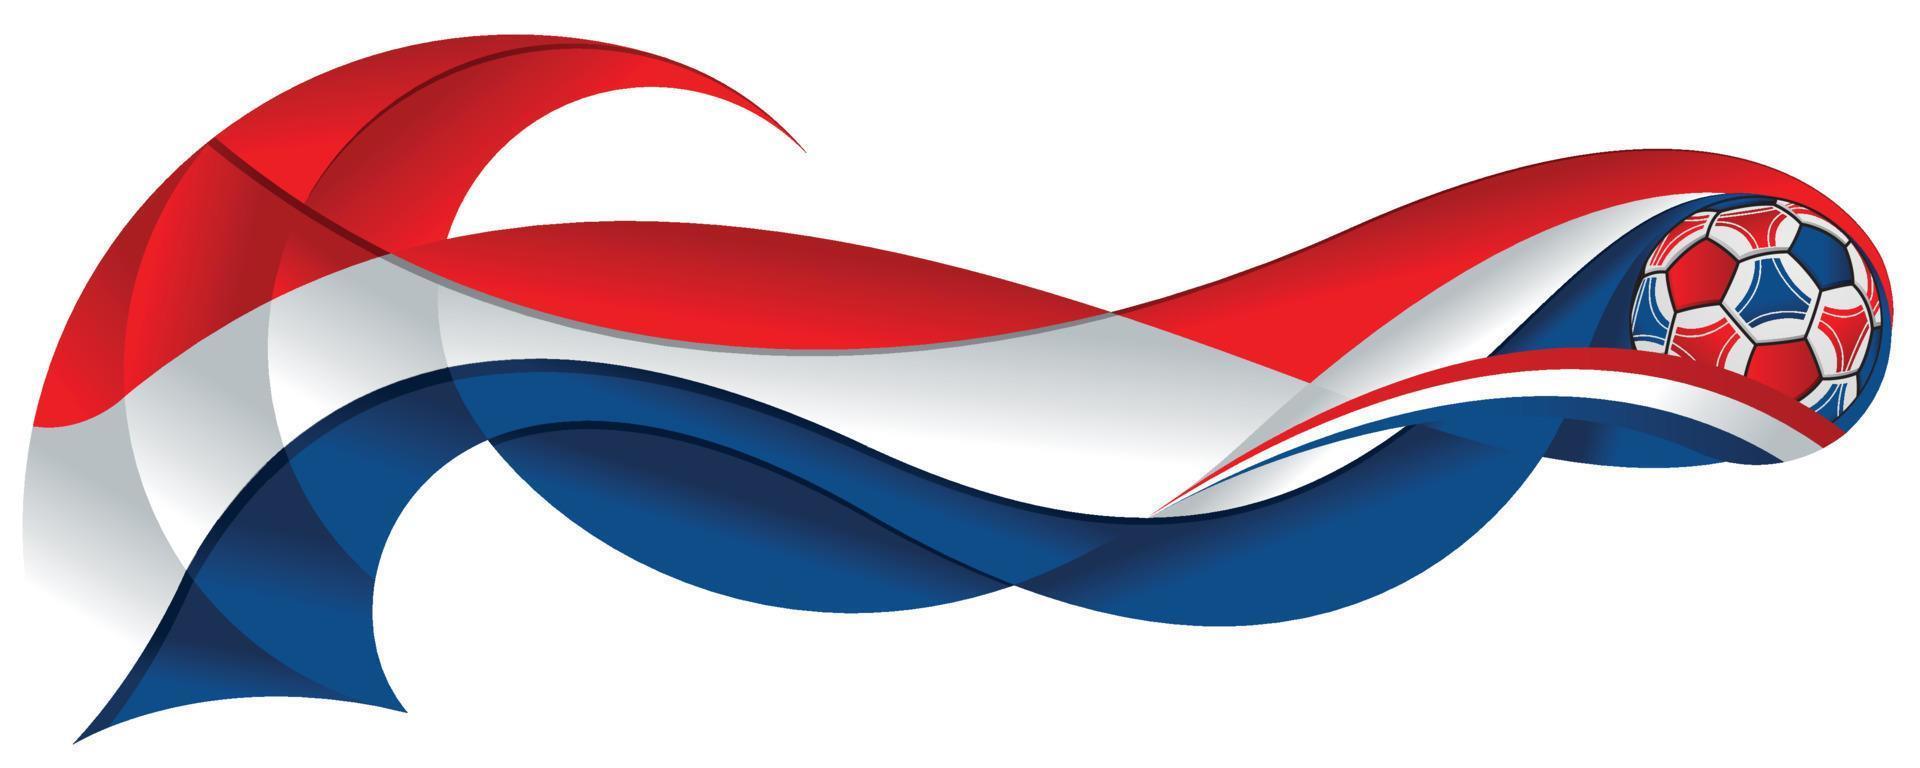 Red white and blue soccer ball leaving an abstract trail in the form of a wavy with the colors of the flag of the Netherlands on a white background vector